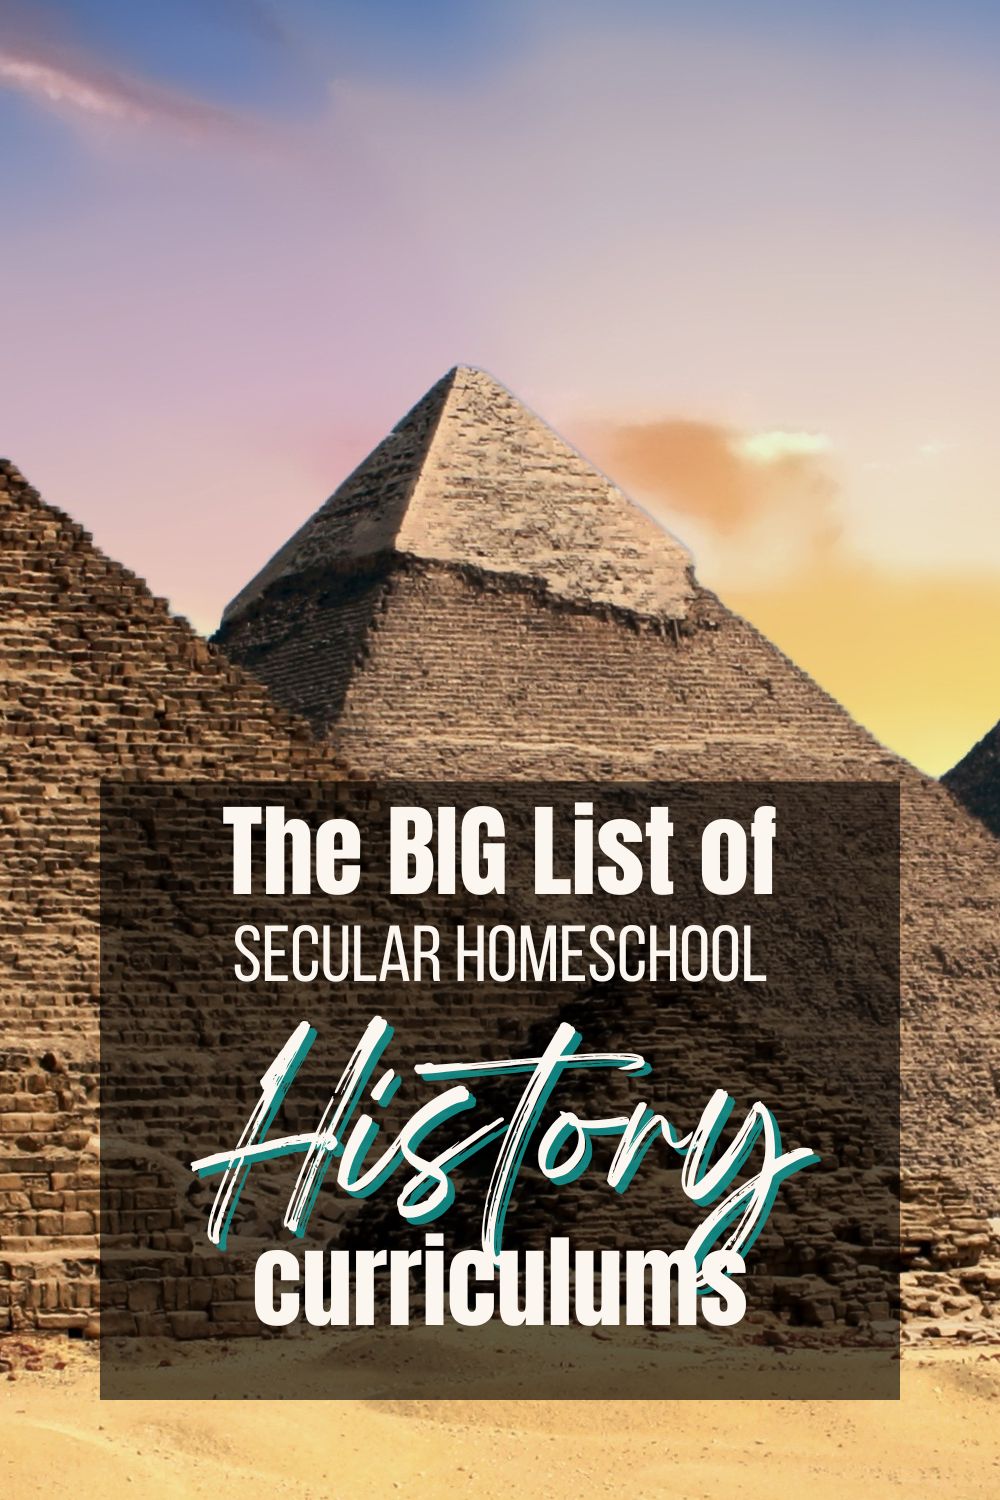 Secular Homeschool History The BIG List of Secular Homeschool History Curriculums Homeschooling has become an increasingly popular educational option for families in recent years. And while traditional homeschool curricula often have a religious focus, there are many secular homeschool programs available, including for history.